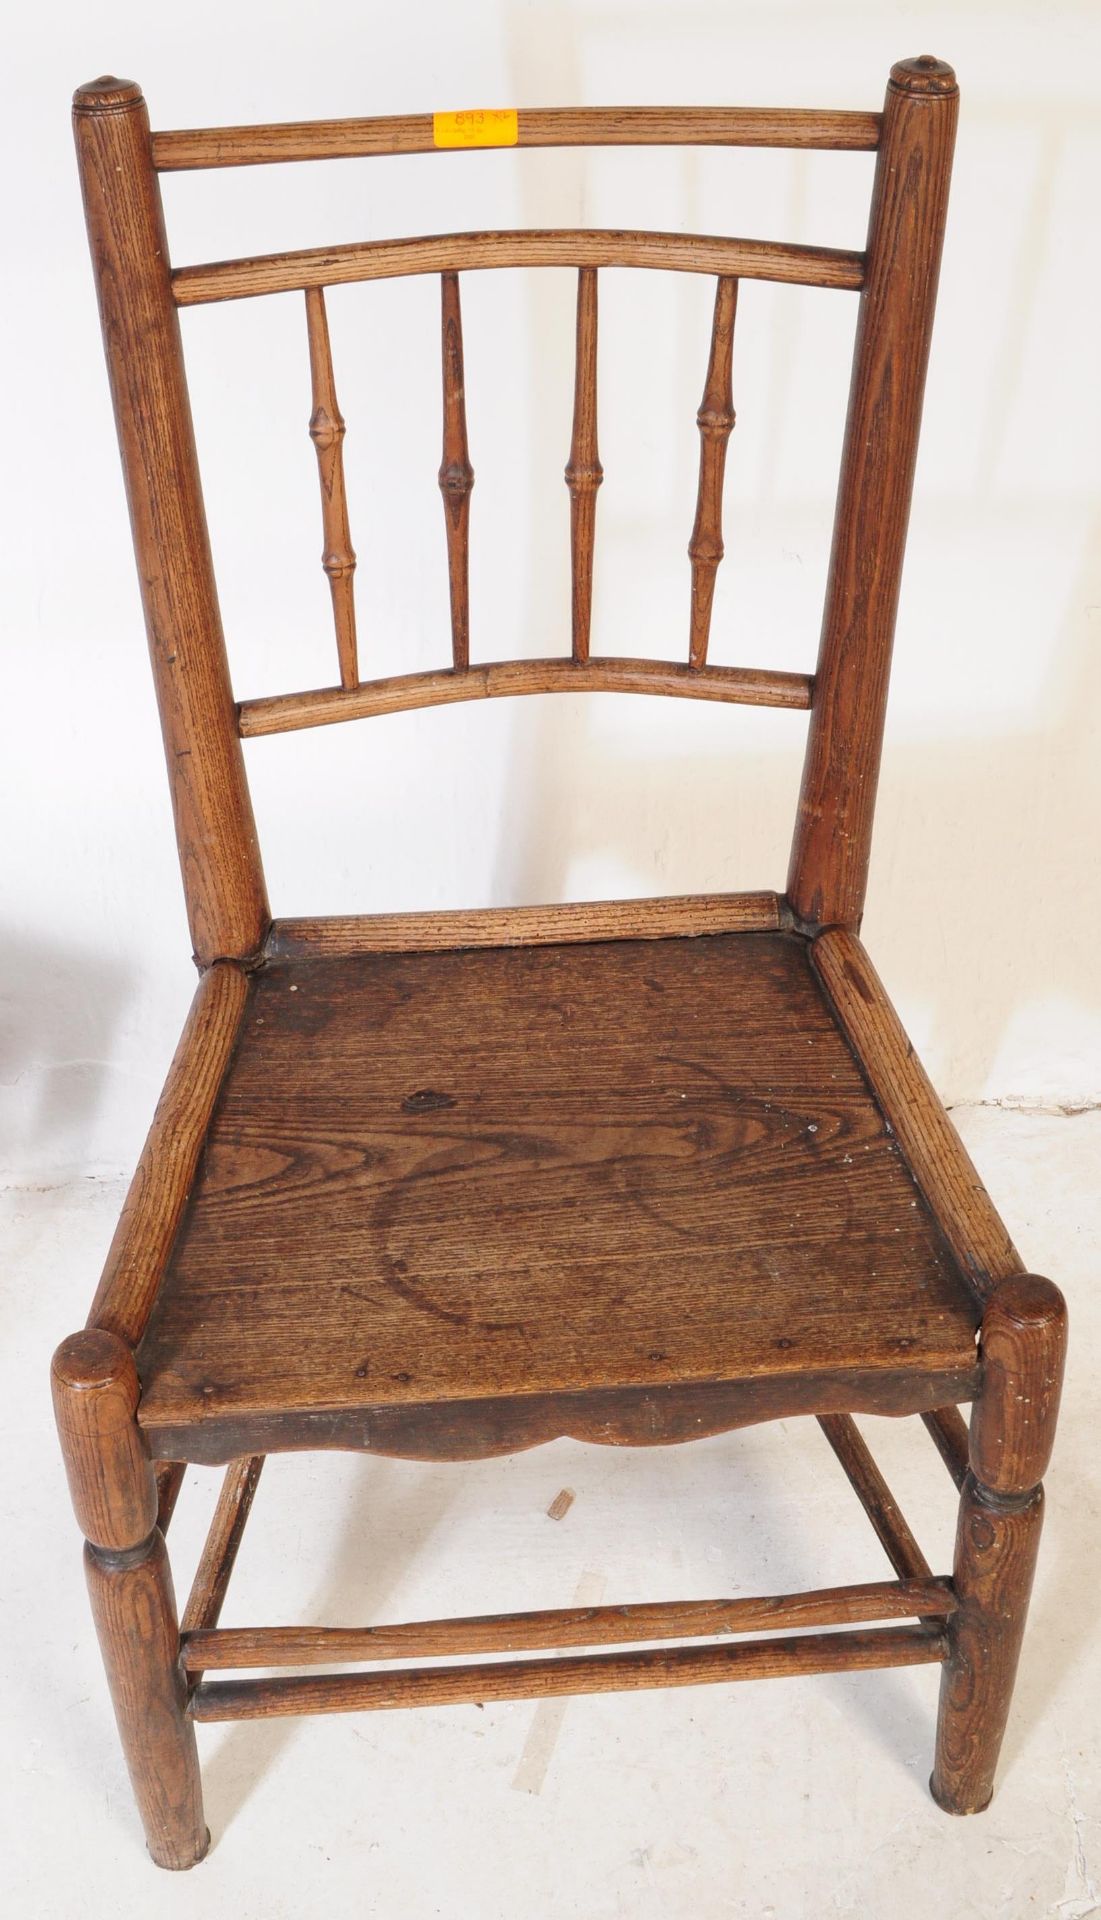 TWO 19TH CENTURY VICTORIAN CHAIRS - WILLIAM BIRCH MANNER - Image 3 of 8